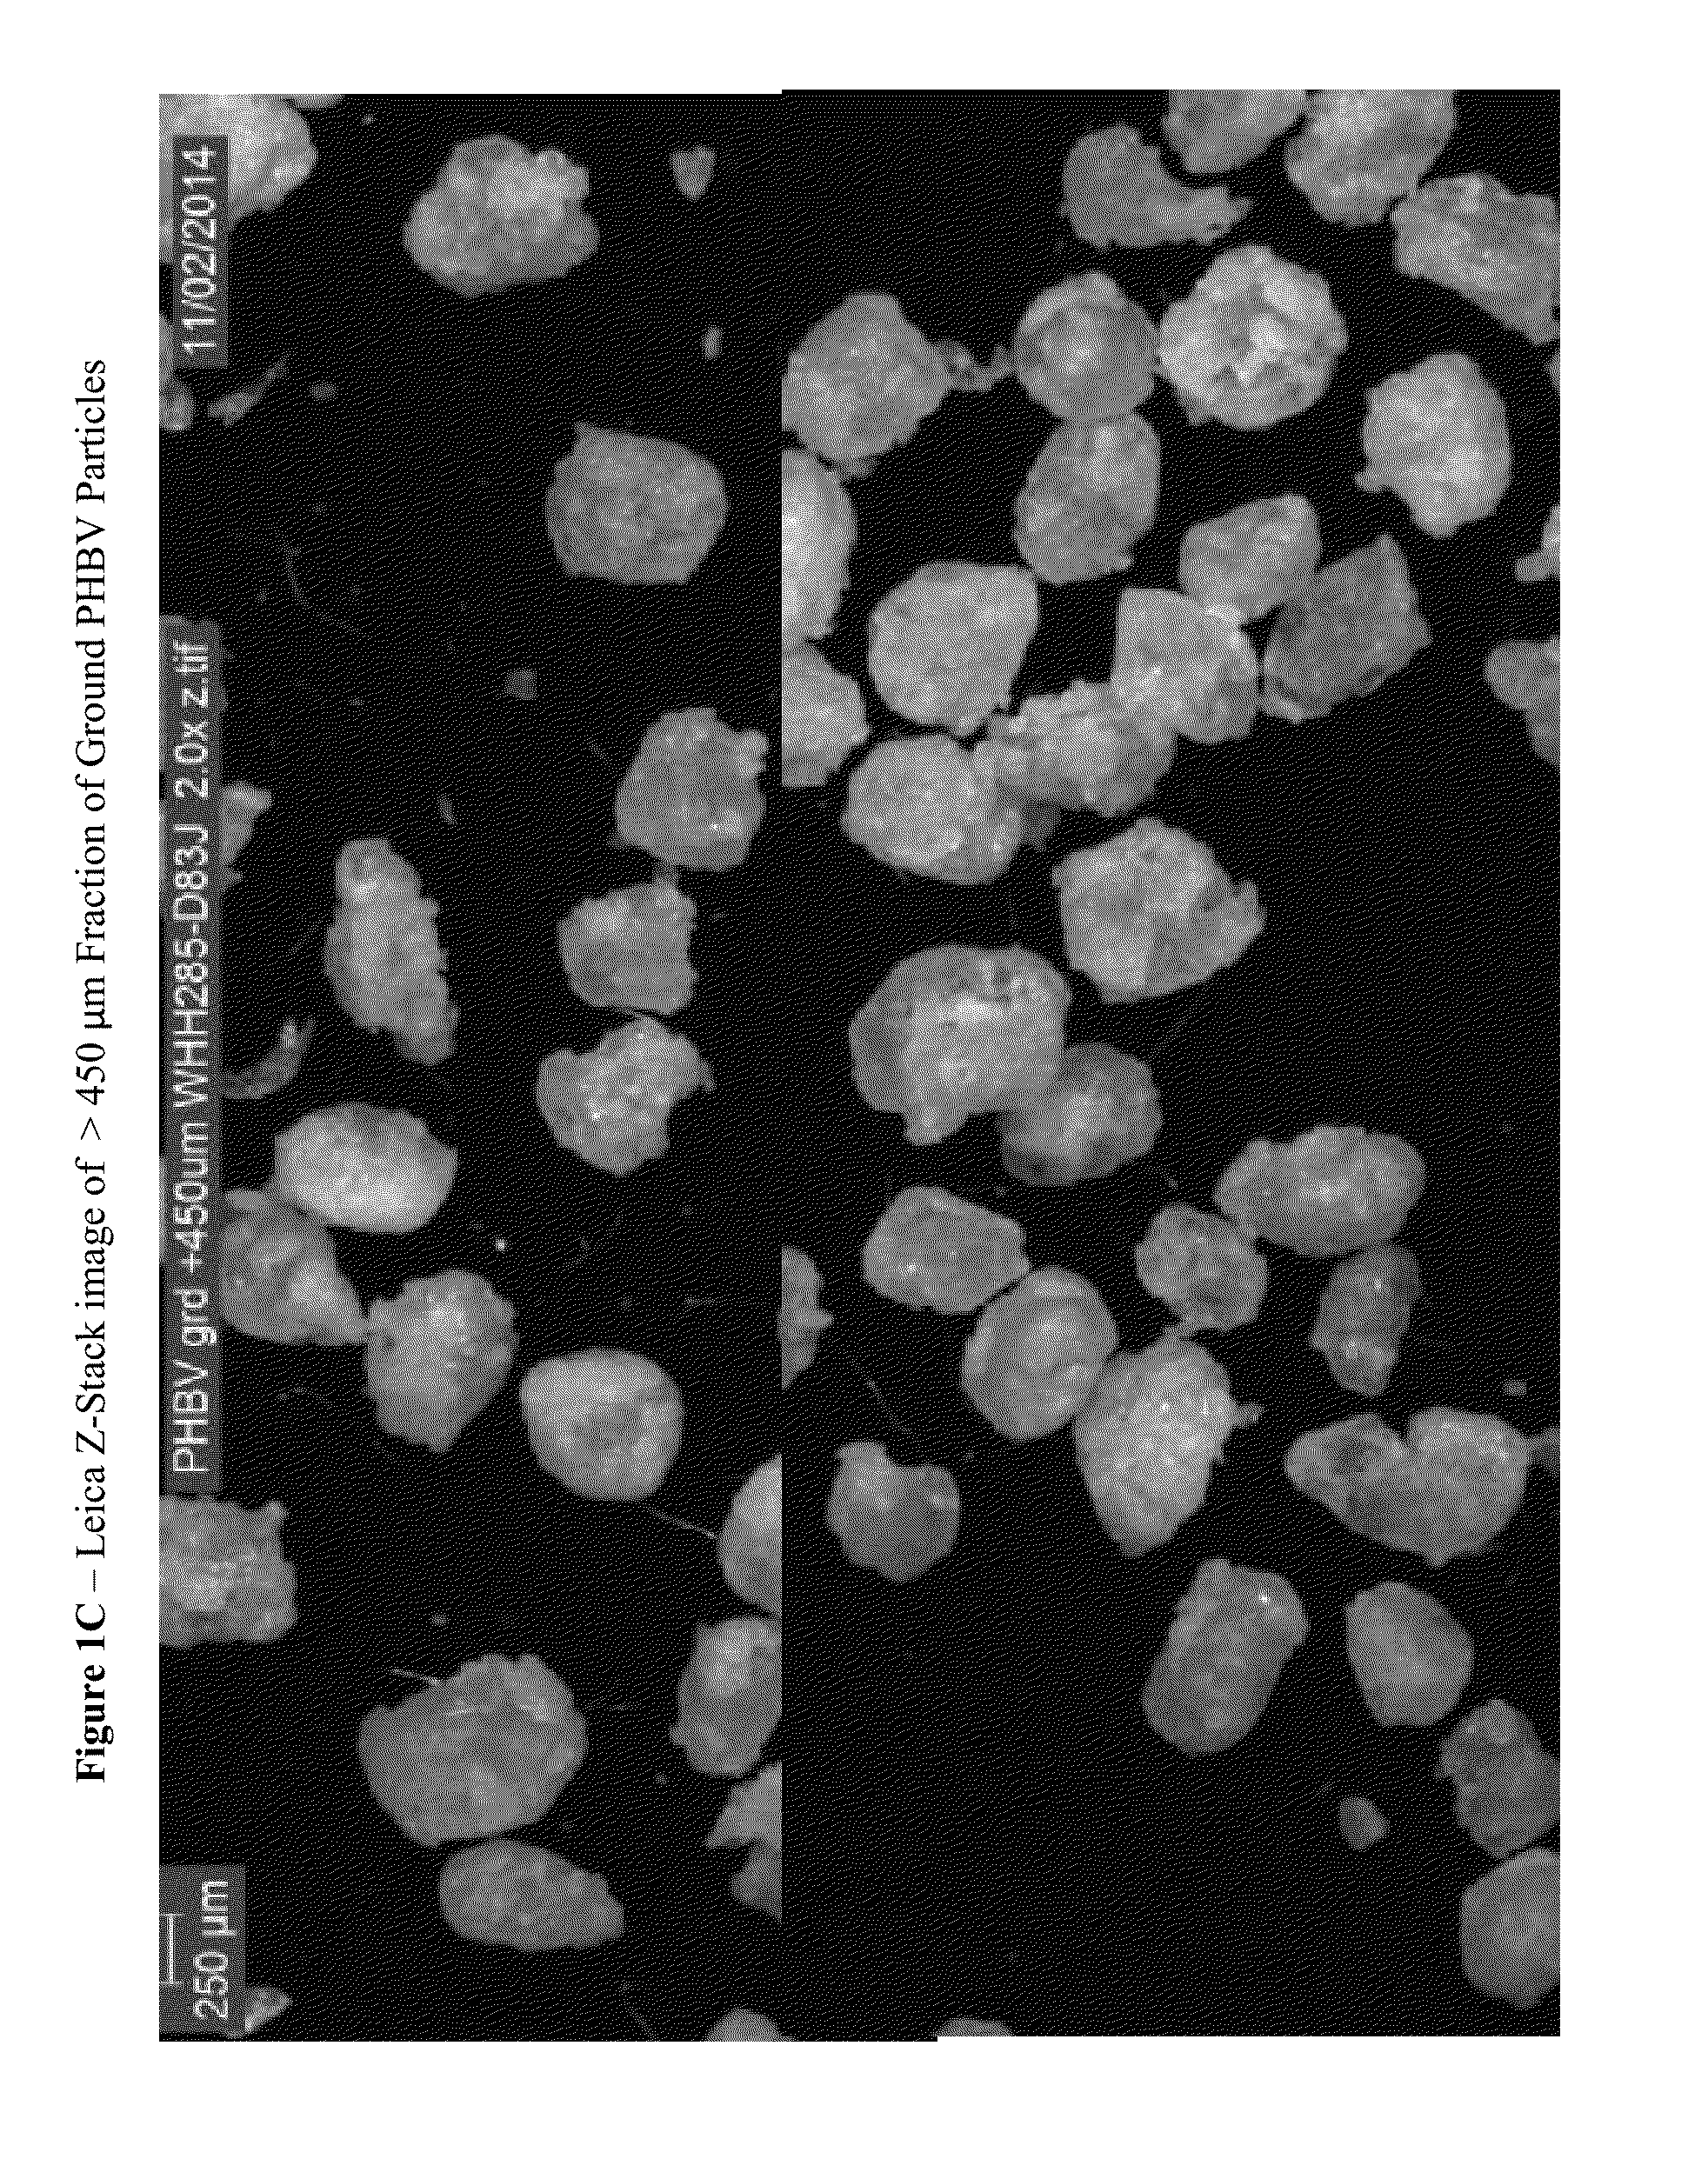 Skin cleansing compositions comprising biodegradable abrasive particles